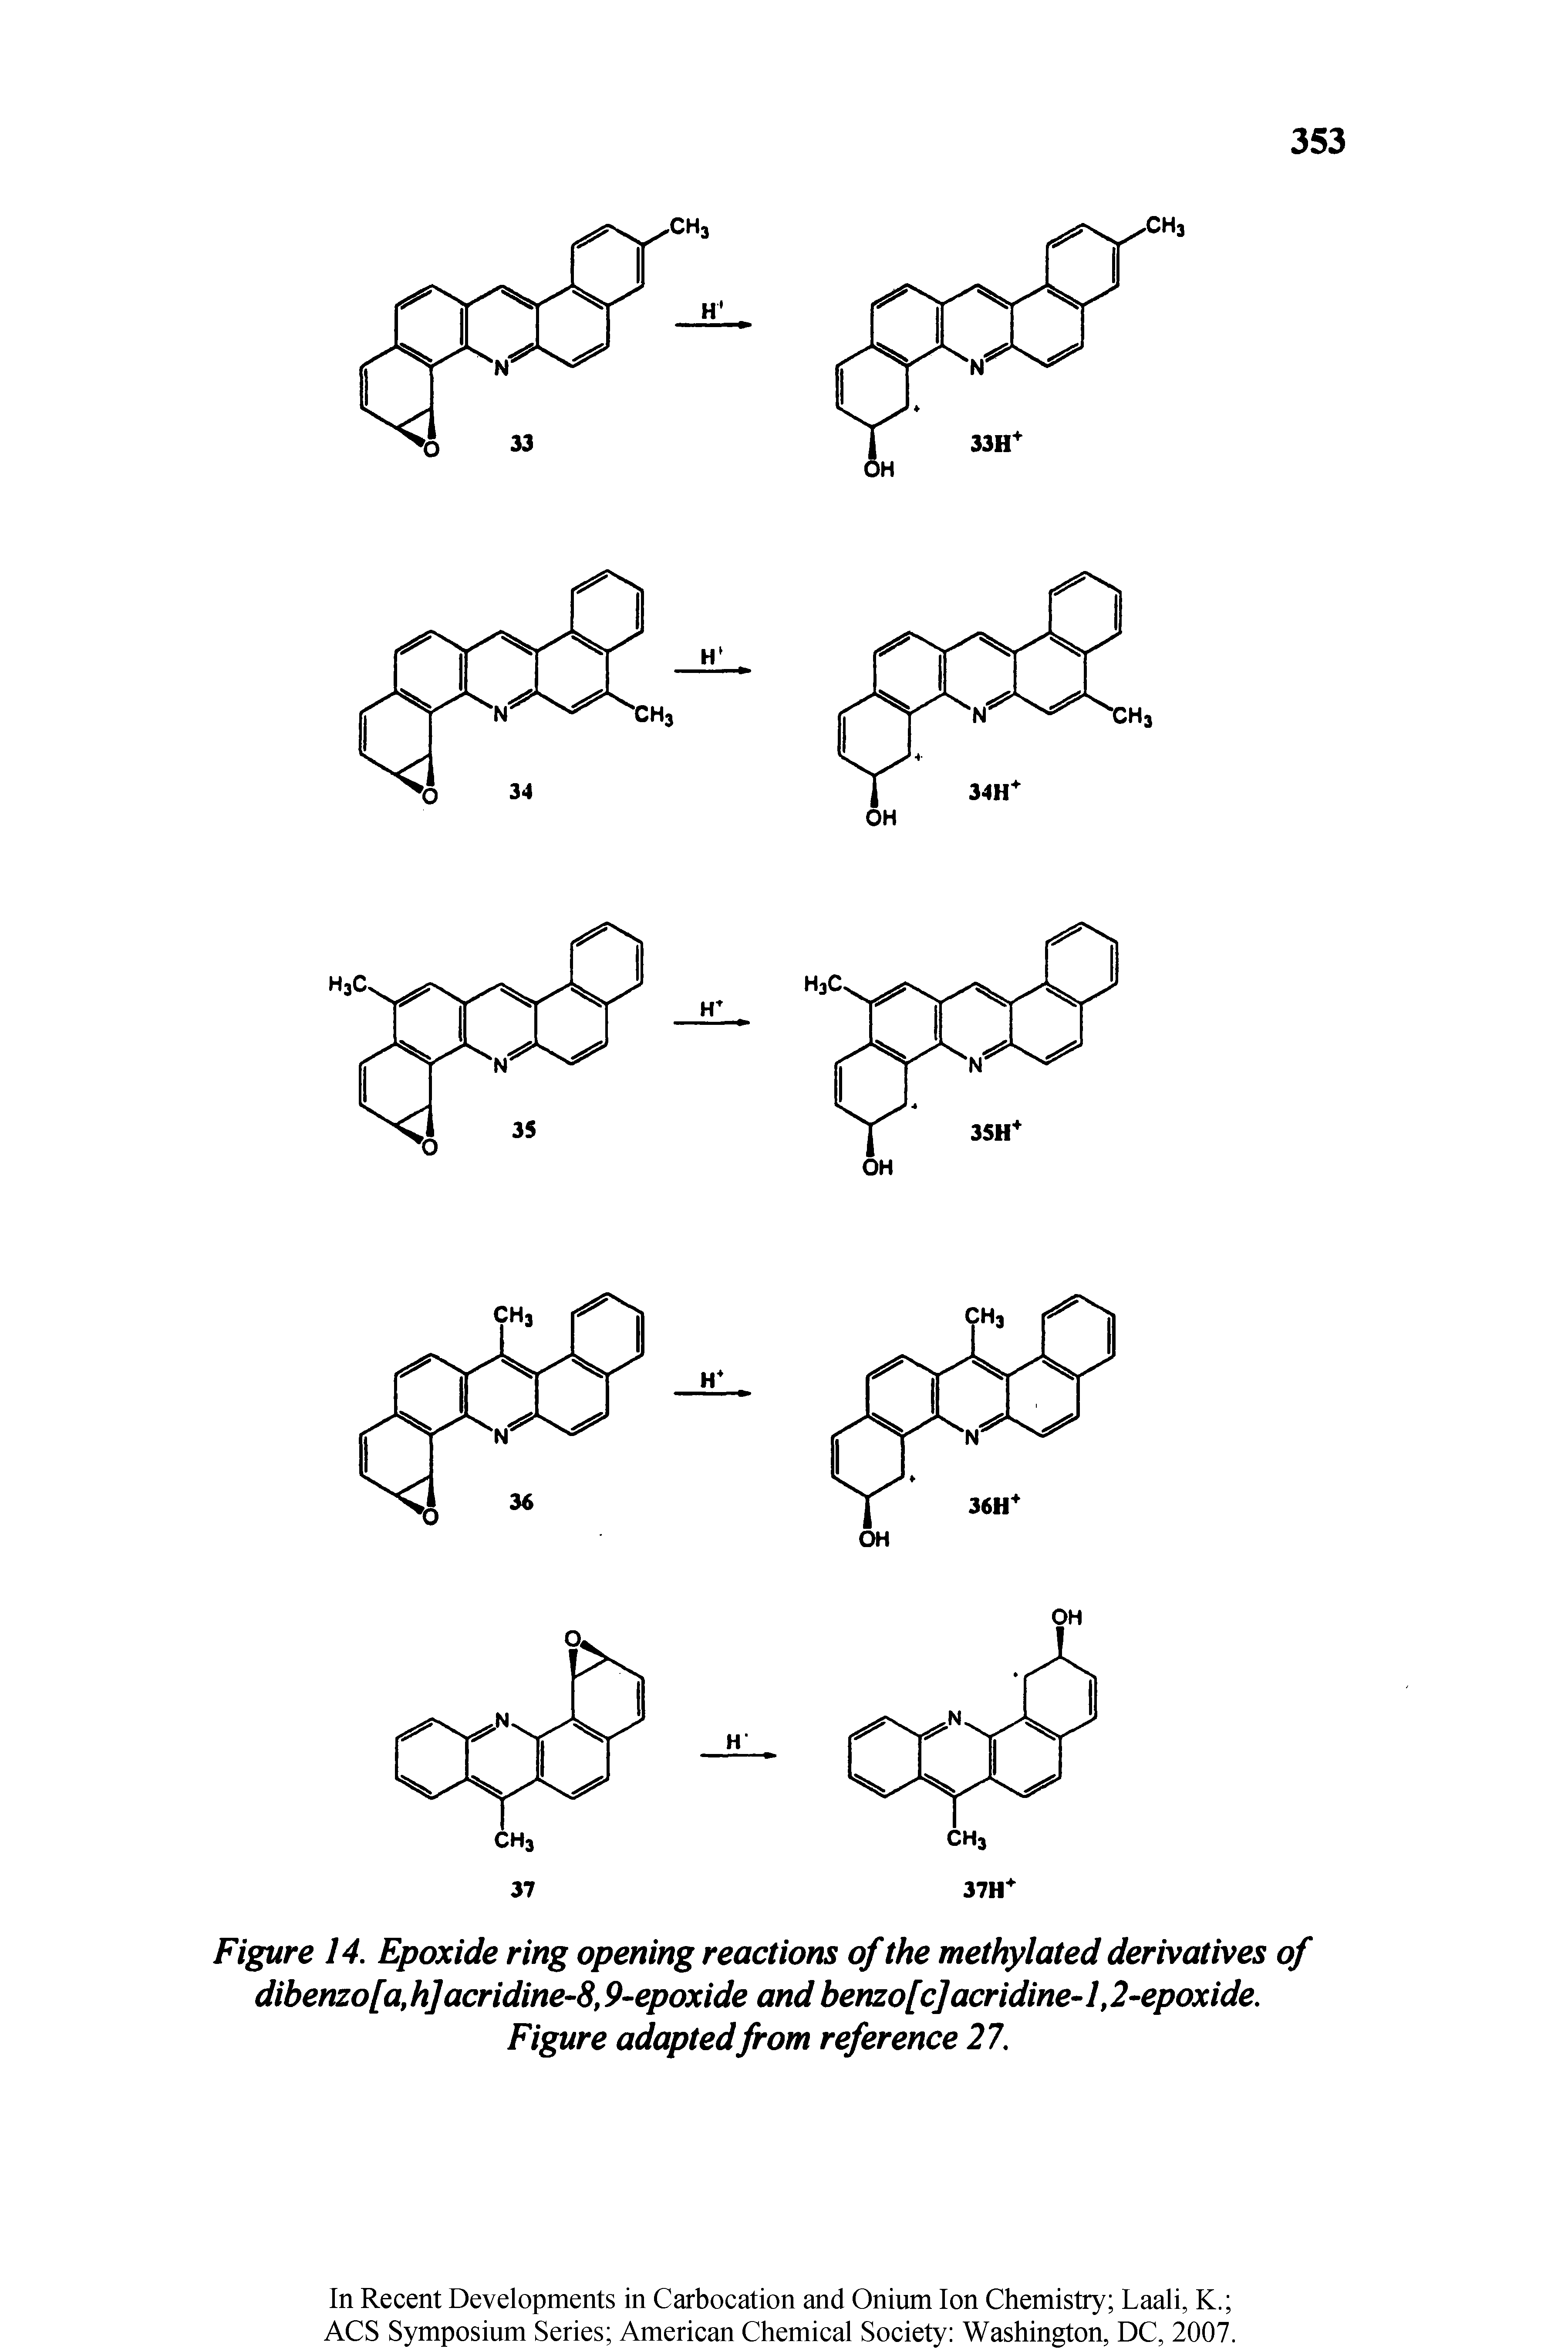 Figure 14. Epoxide ring opening reactions of the methylated derivatives of dibenzo[a,h] acridine-8,9-epoxide and benzo[c]acridine-1,2-epoxide. Figure adaptedfrom reference 27.